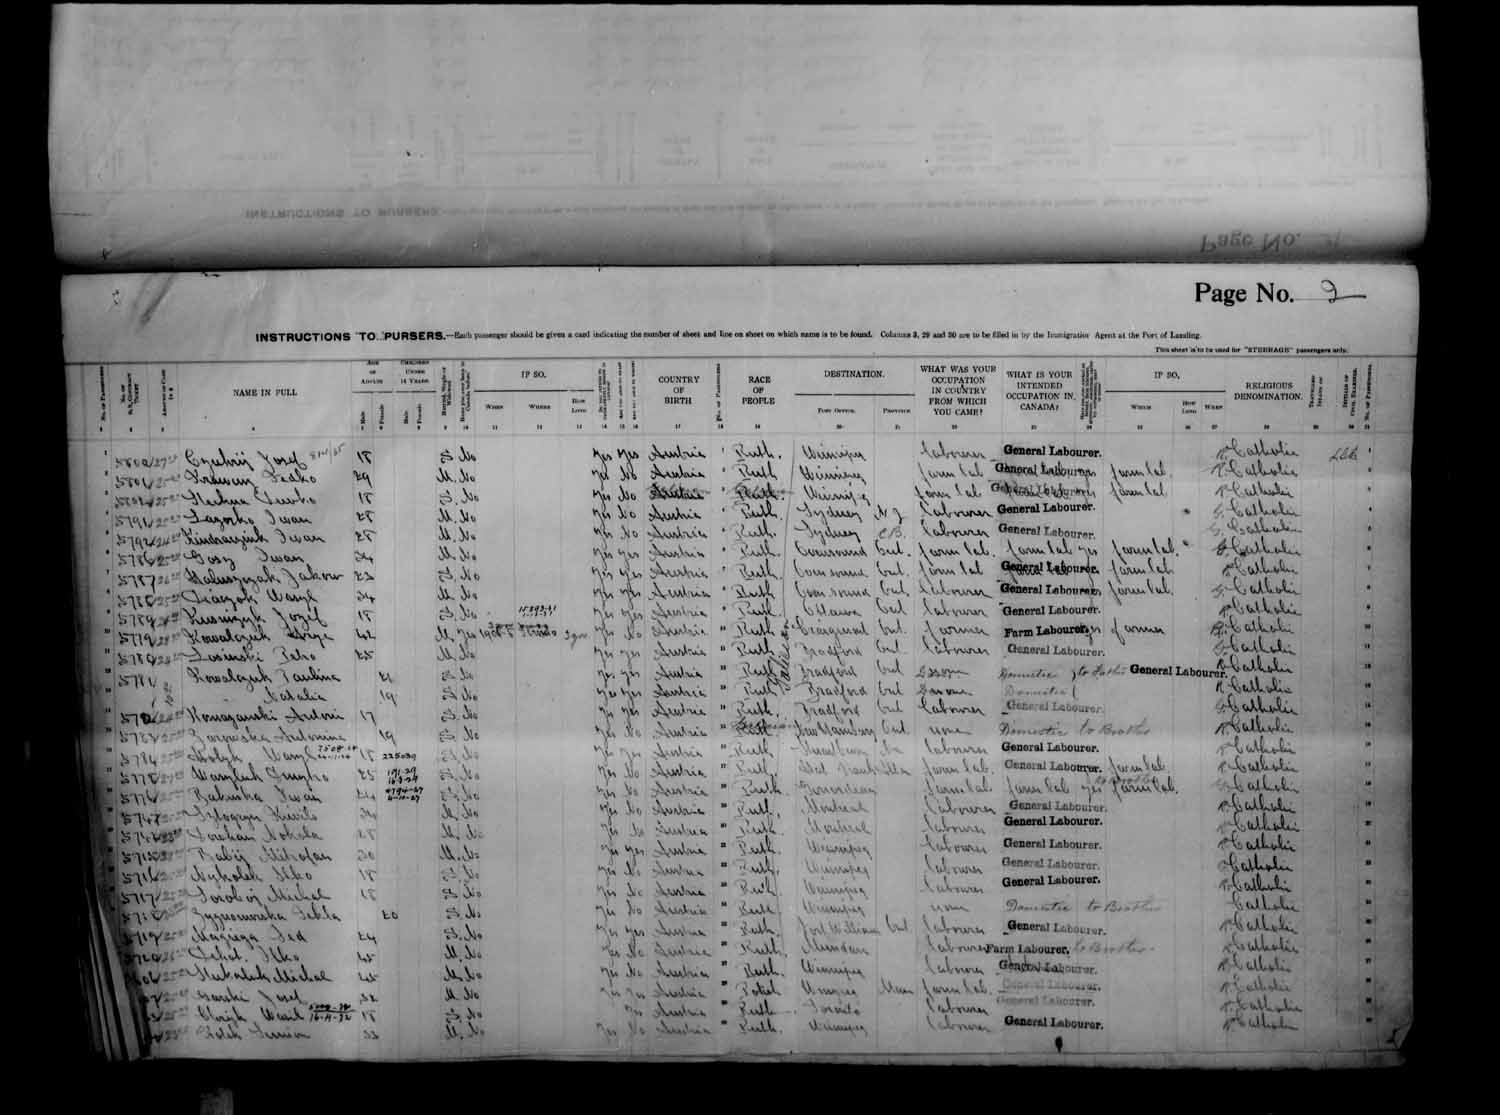 Digitized page of Passenger Lists for Image No.: e003686910